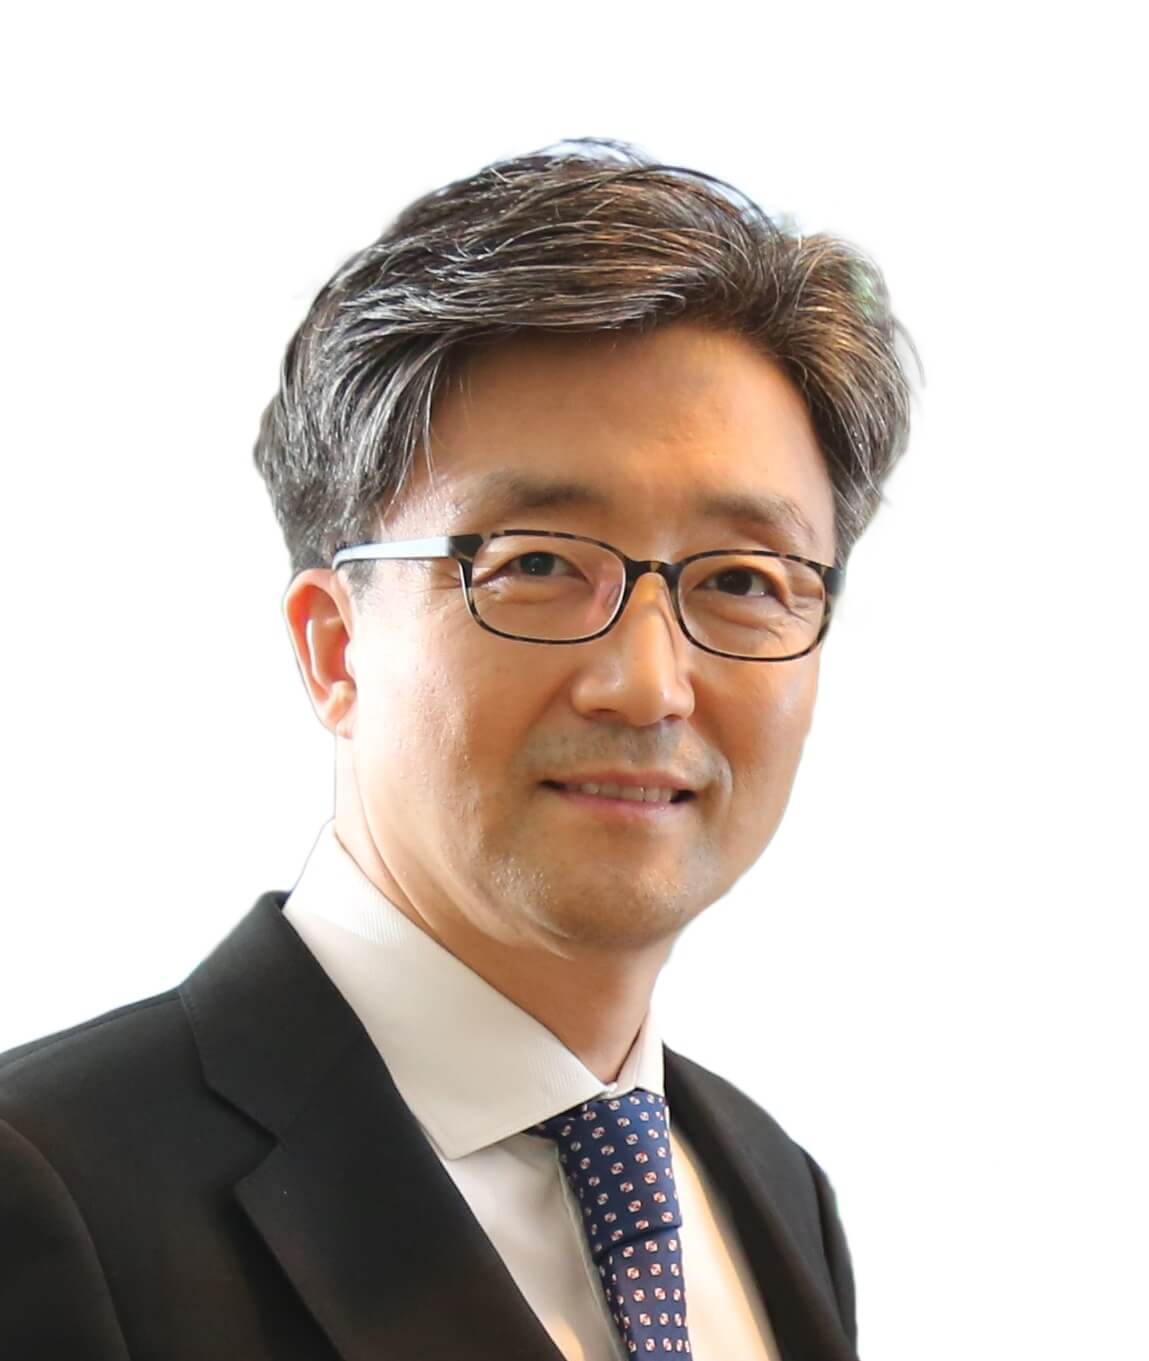 Jimmy Kim Managing Director of Globecast in Asia